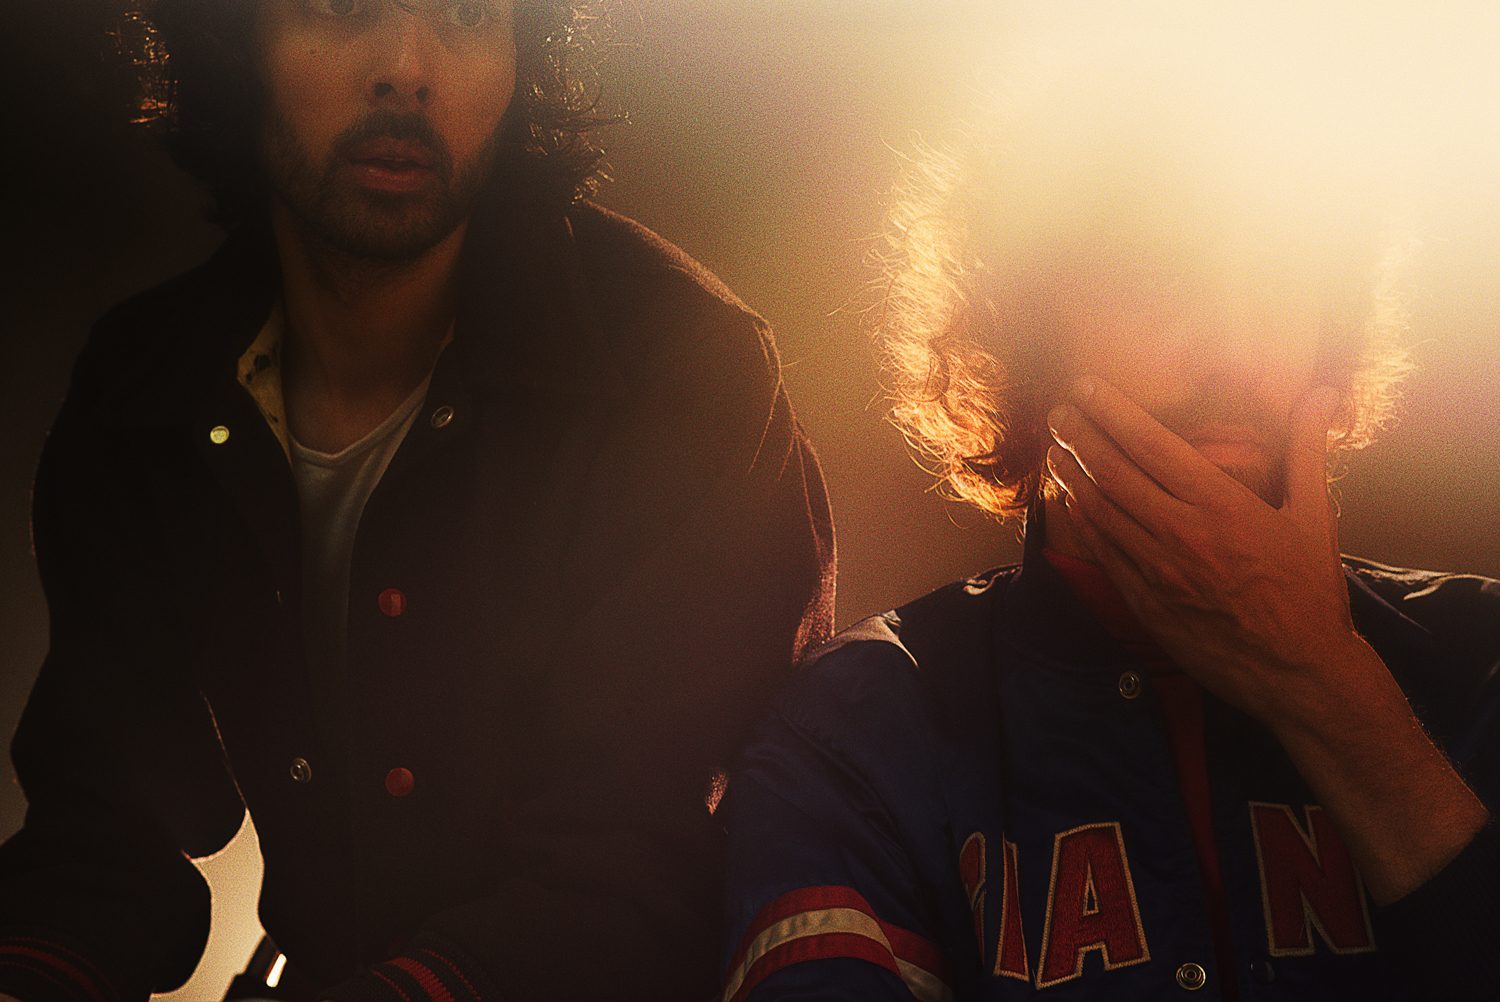 Justice Teams Up With Tame Impala For Latest Single “Neverender”